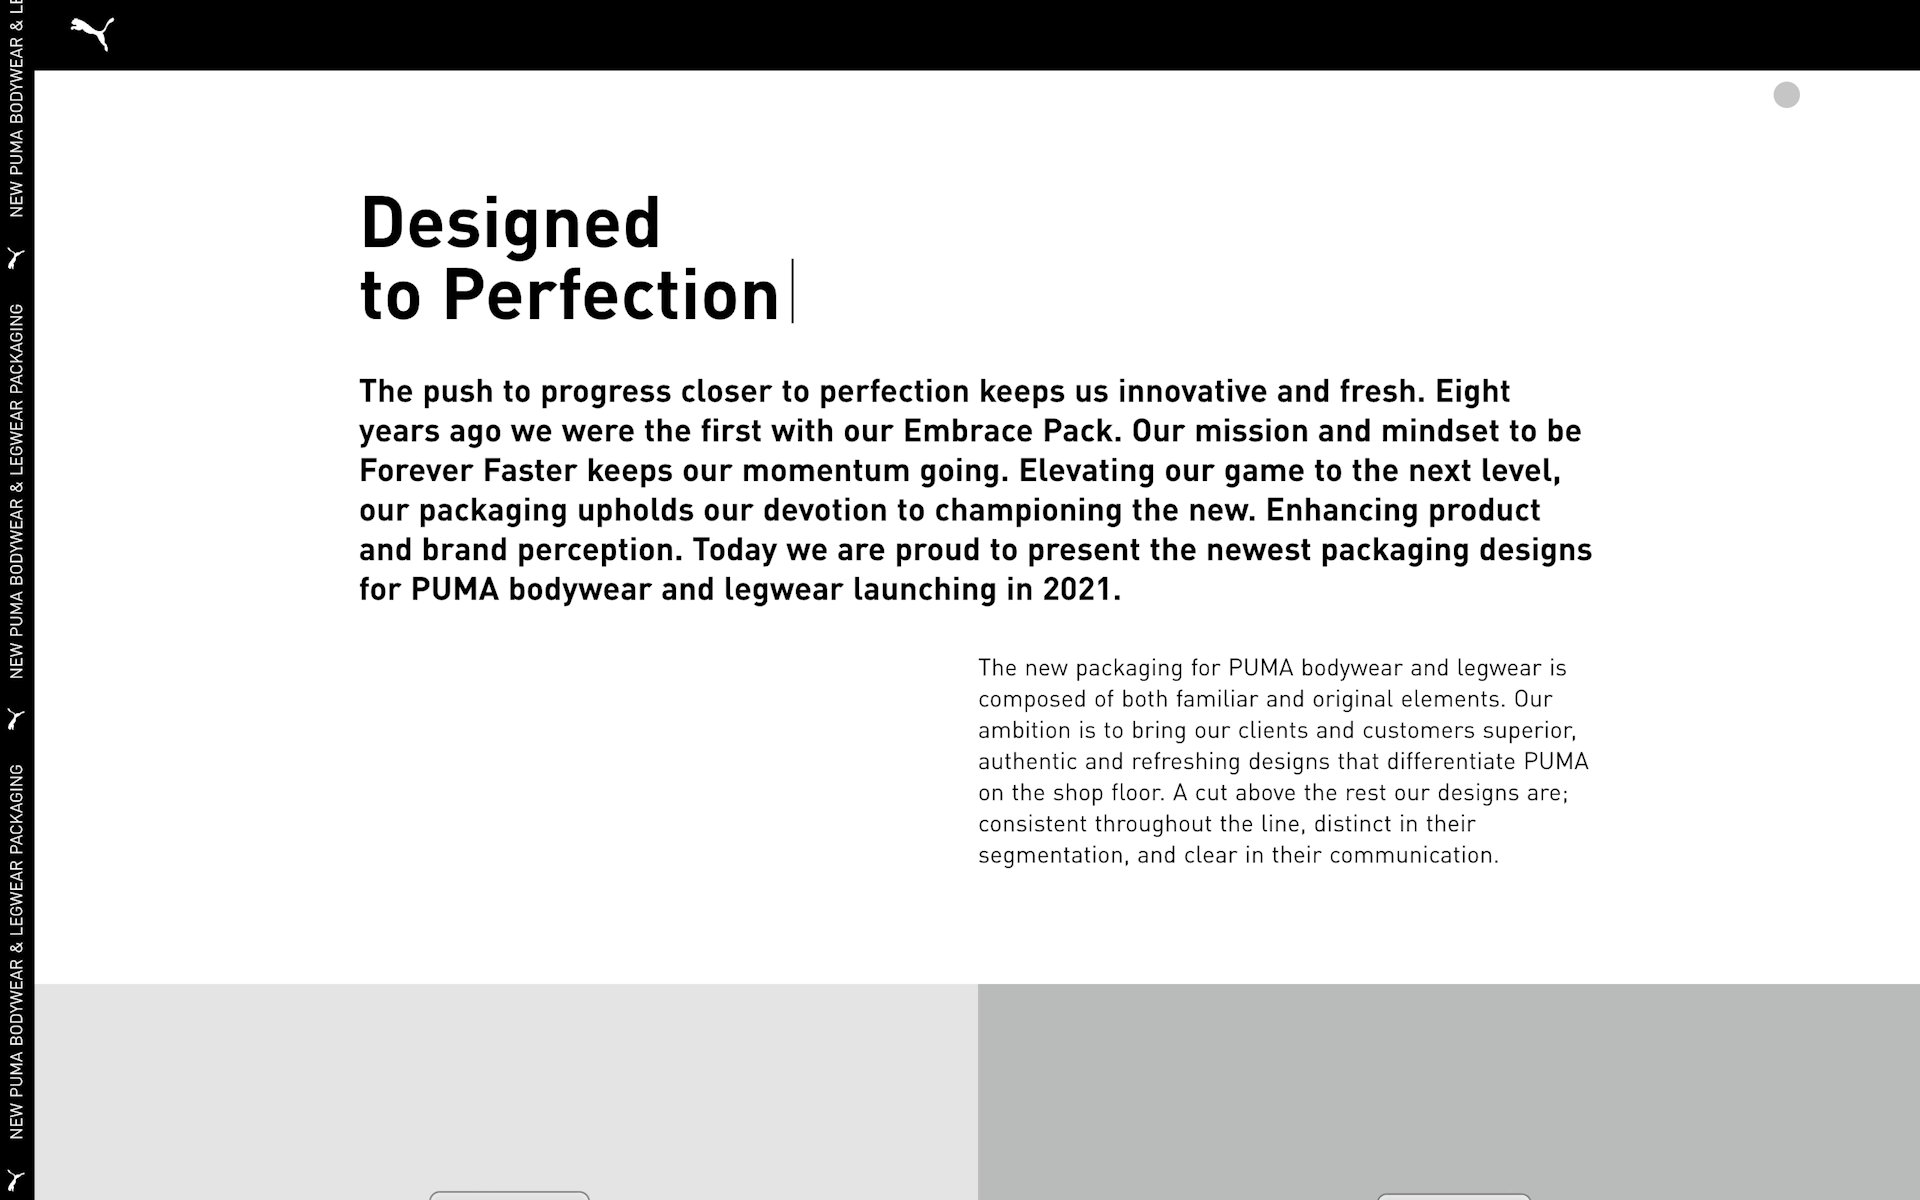 Screenshot of the Phase 2 Puma Bodywear Website showing two text paragraphs